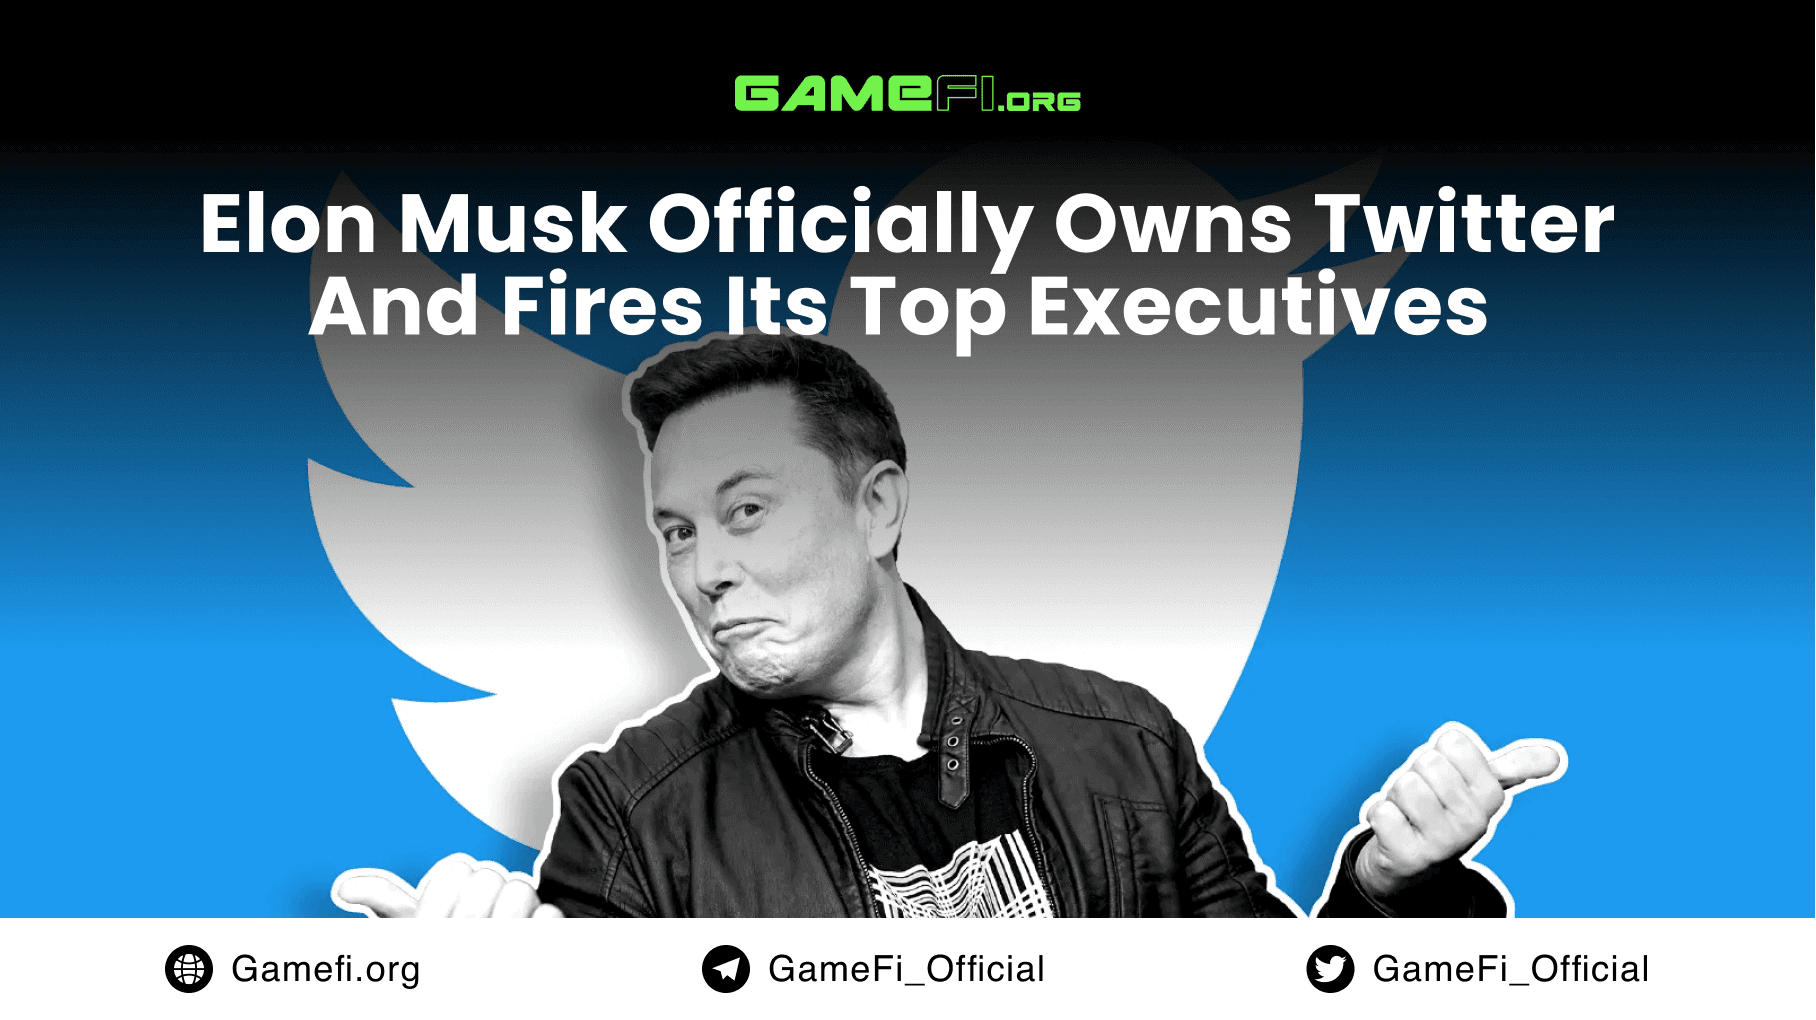 Elon Musk Officially Owns Twitter and Fires Its Top Executives